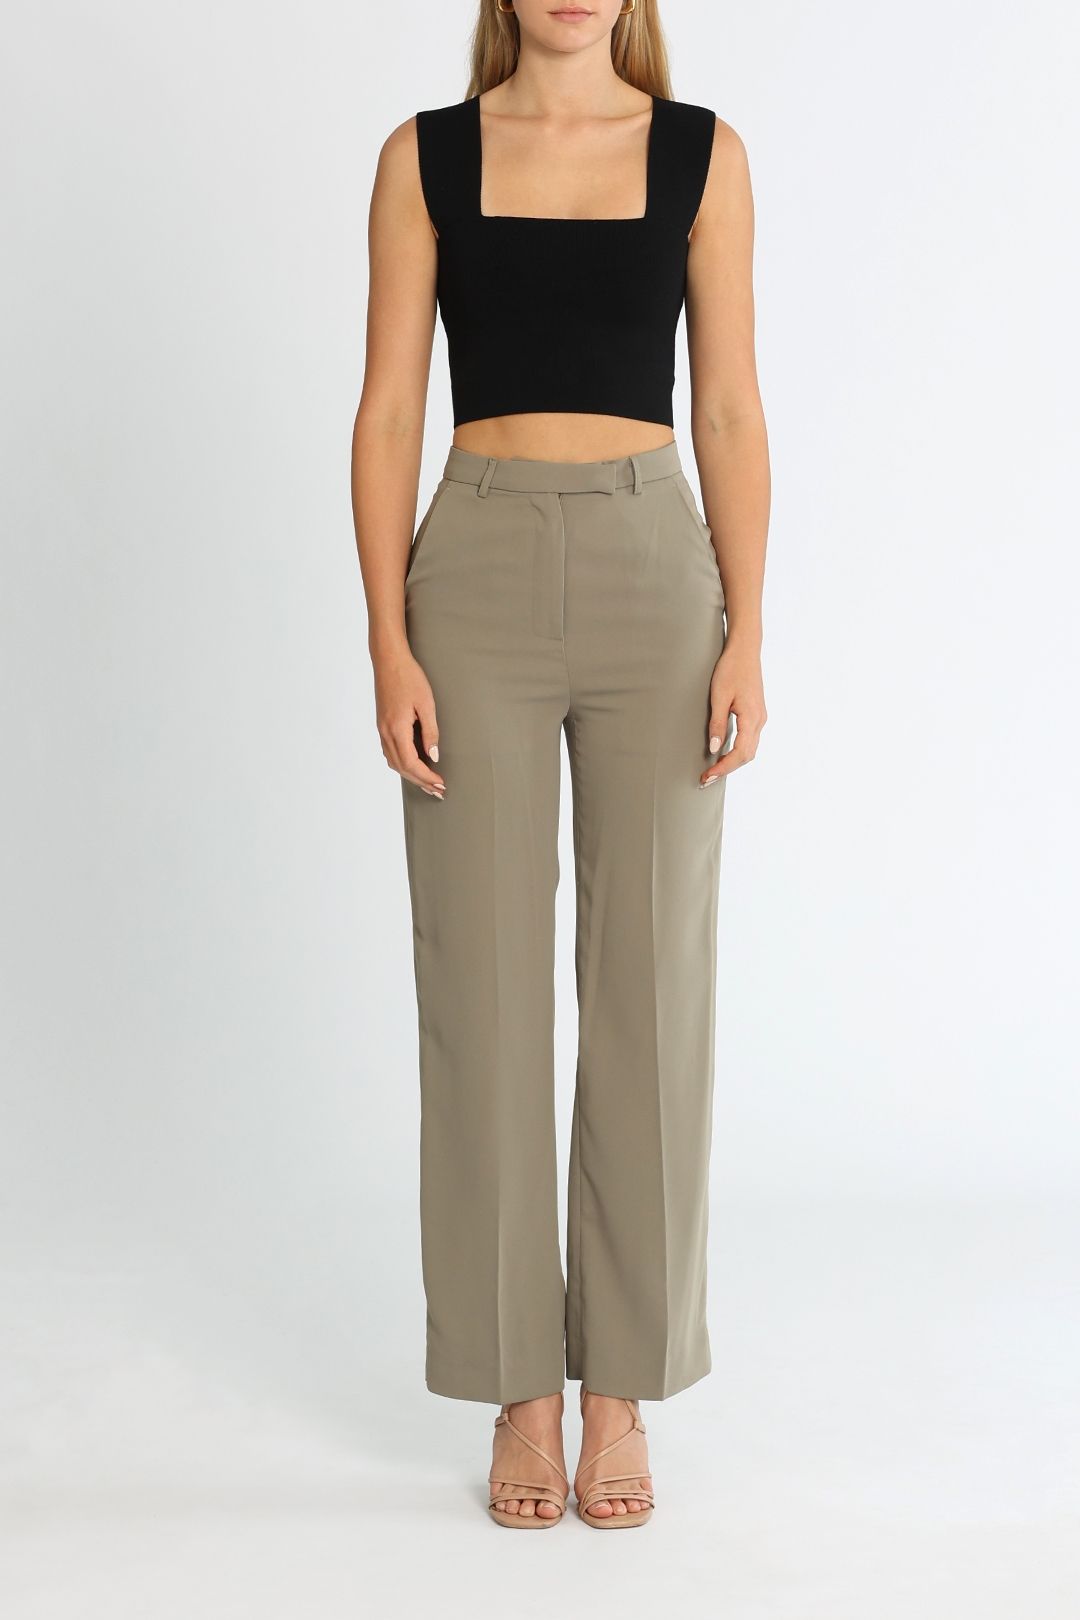 The Frankie Shop Isla Tailored Trousers Coriander